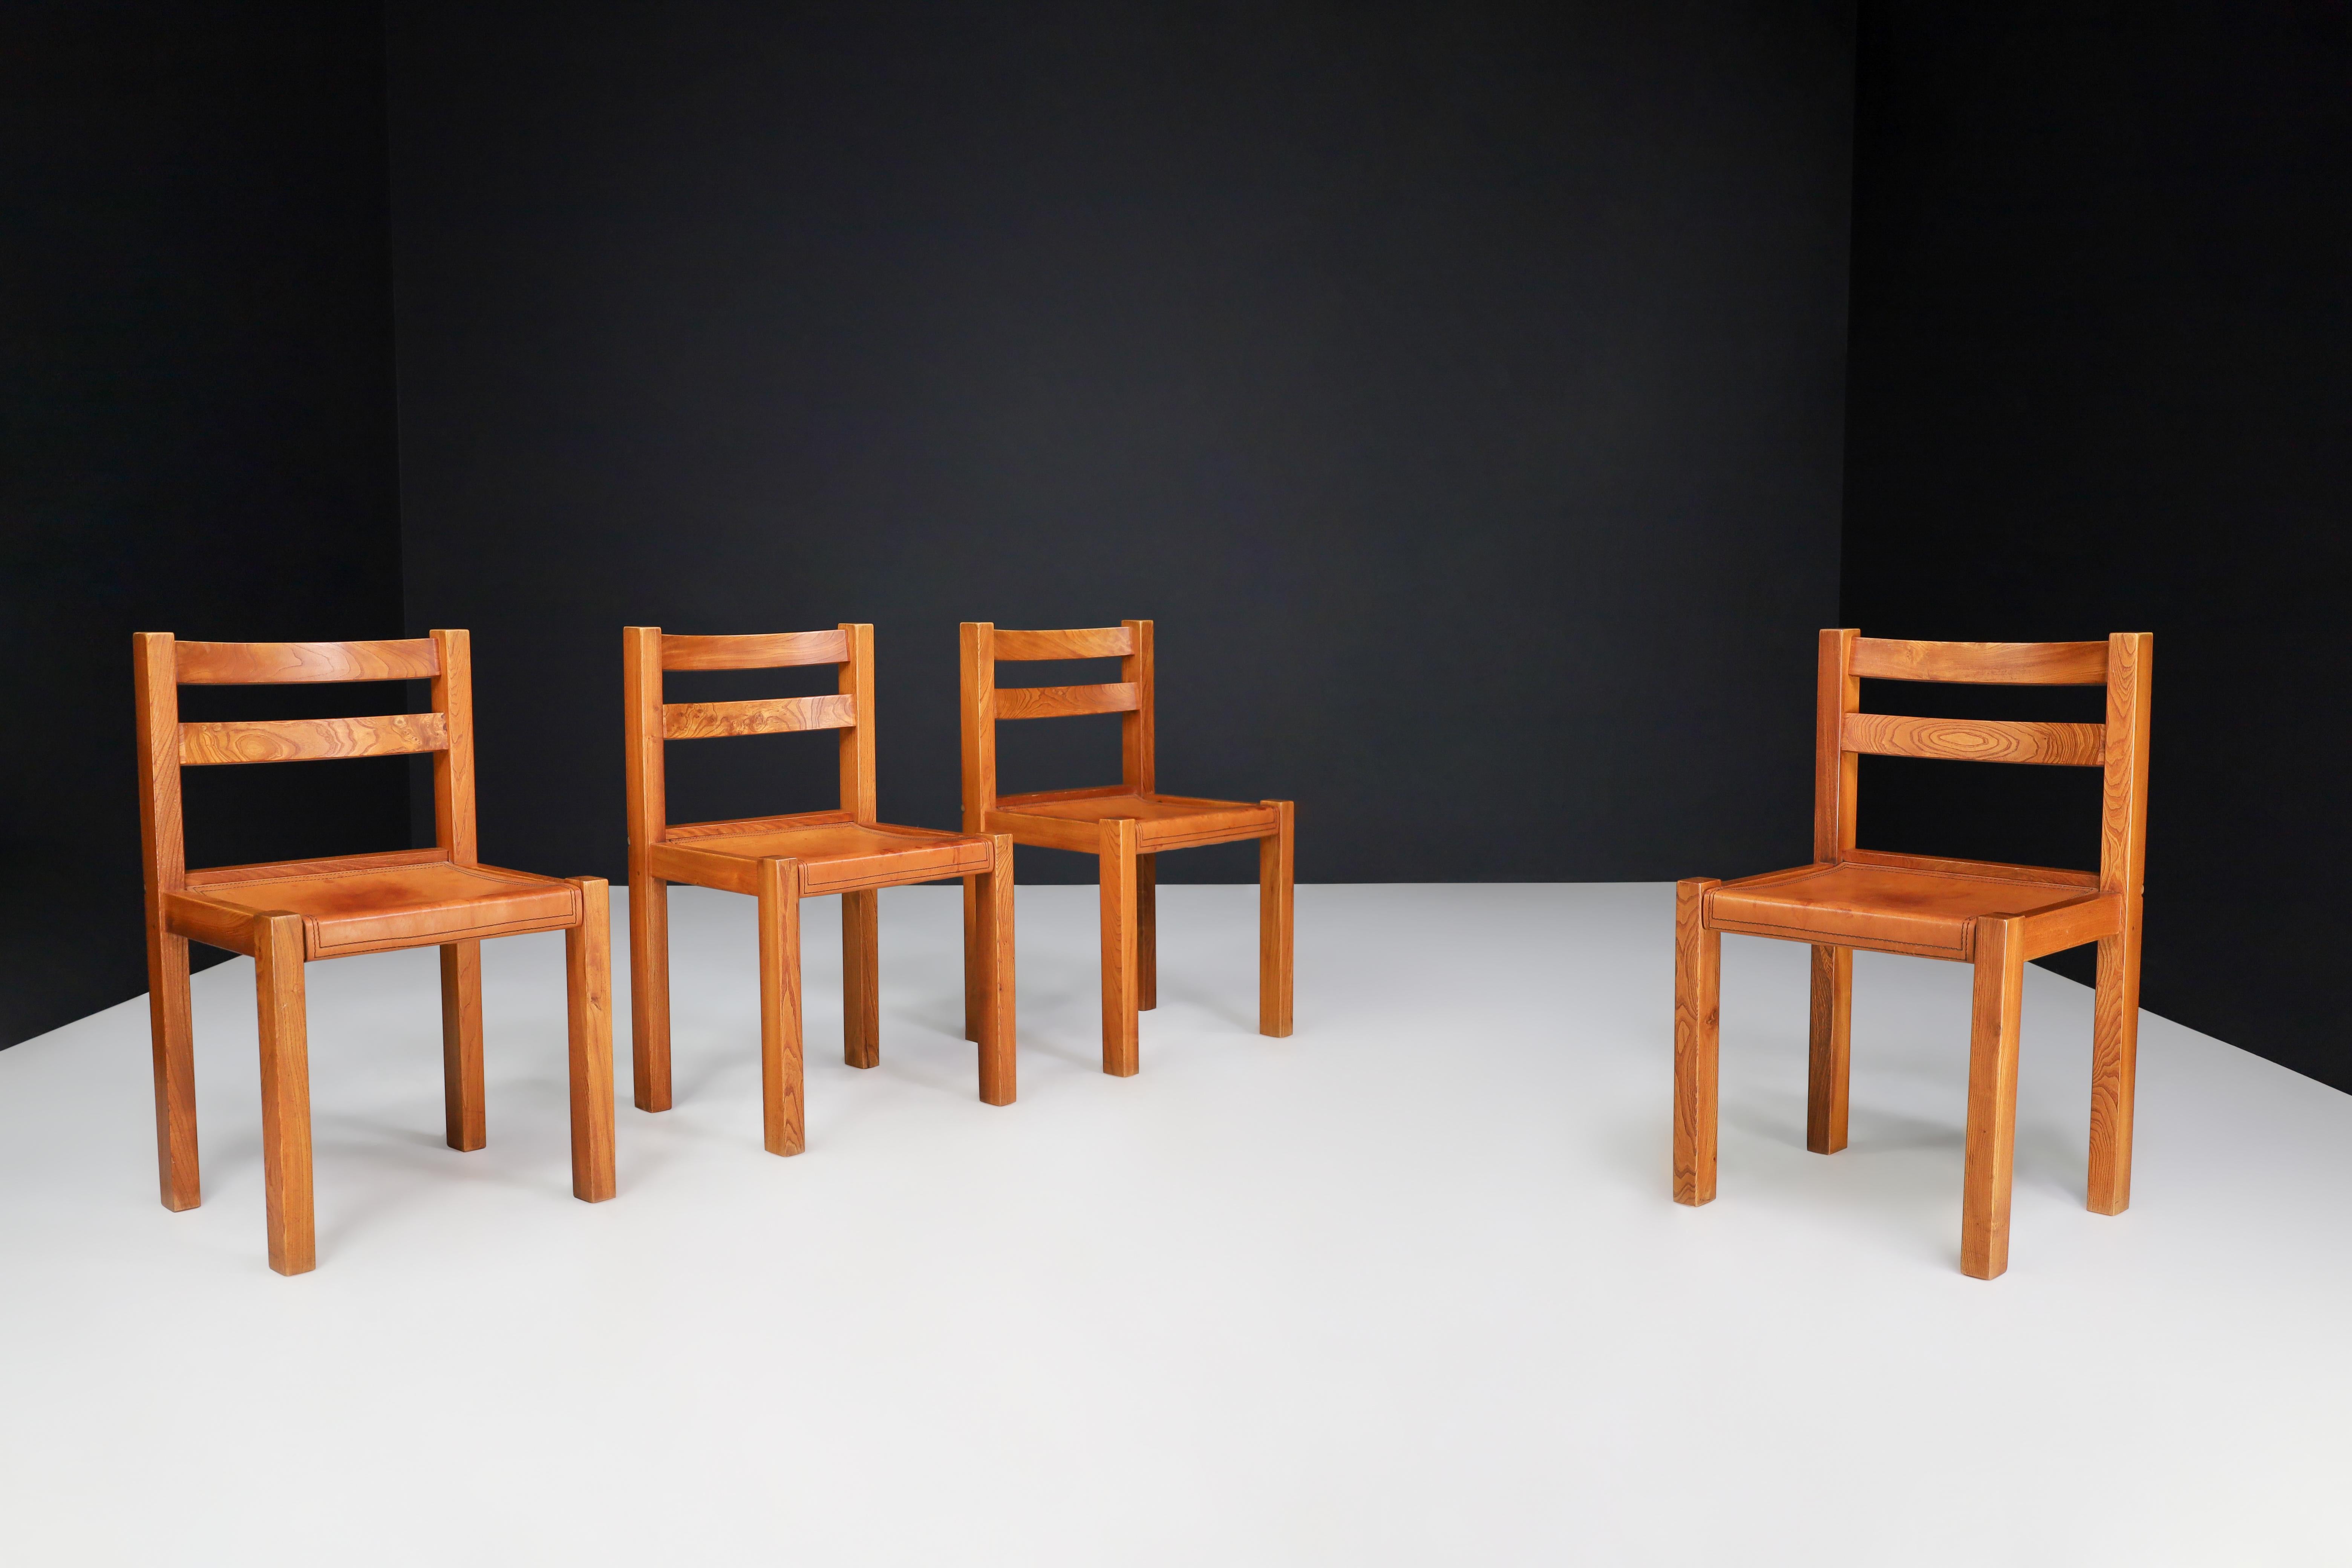 Elm and Cognac Leather Dining room Chairs set of 4, Italy 1950s

This set of four dining chairs was manufactured in Italy in the 1950s and is made of elm wood and cognac-colored leather. The chairs have a simple design with straight lines and are